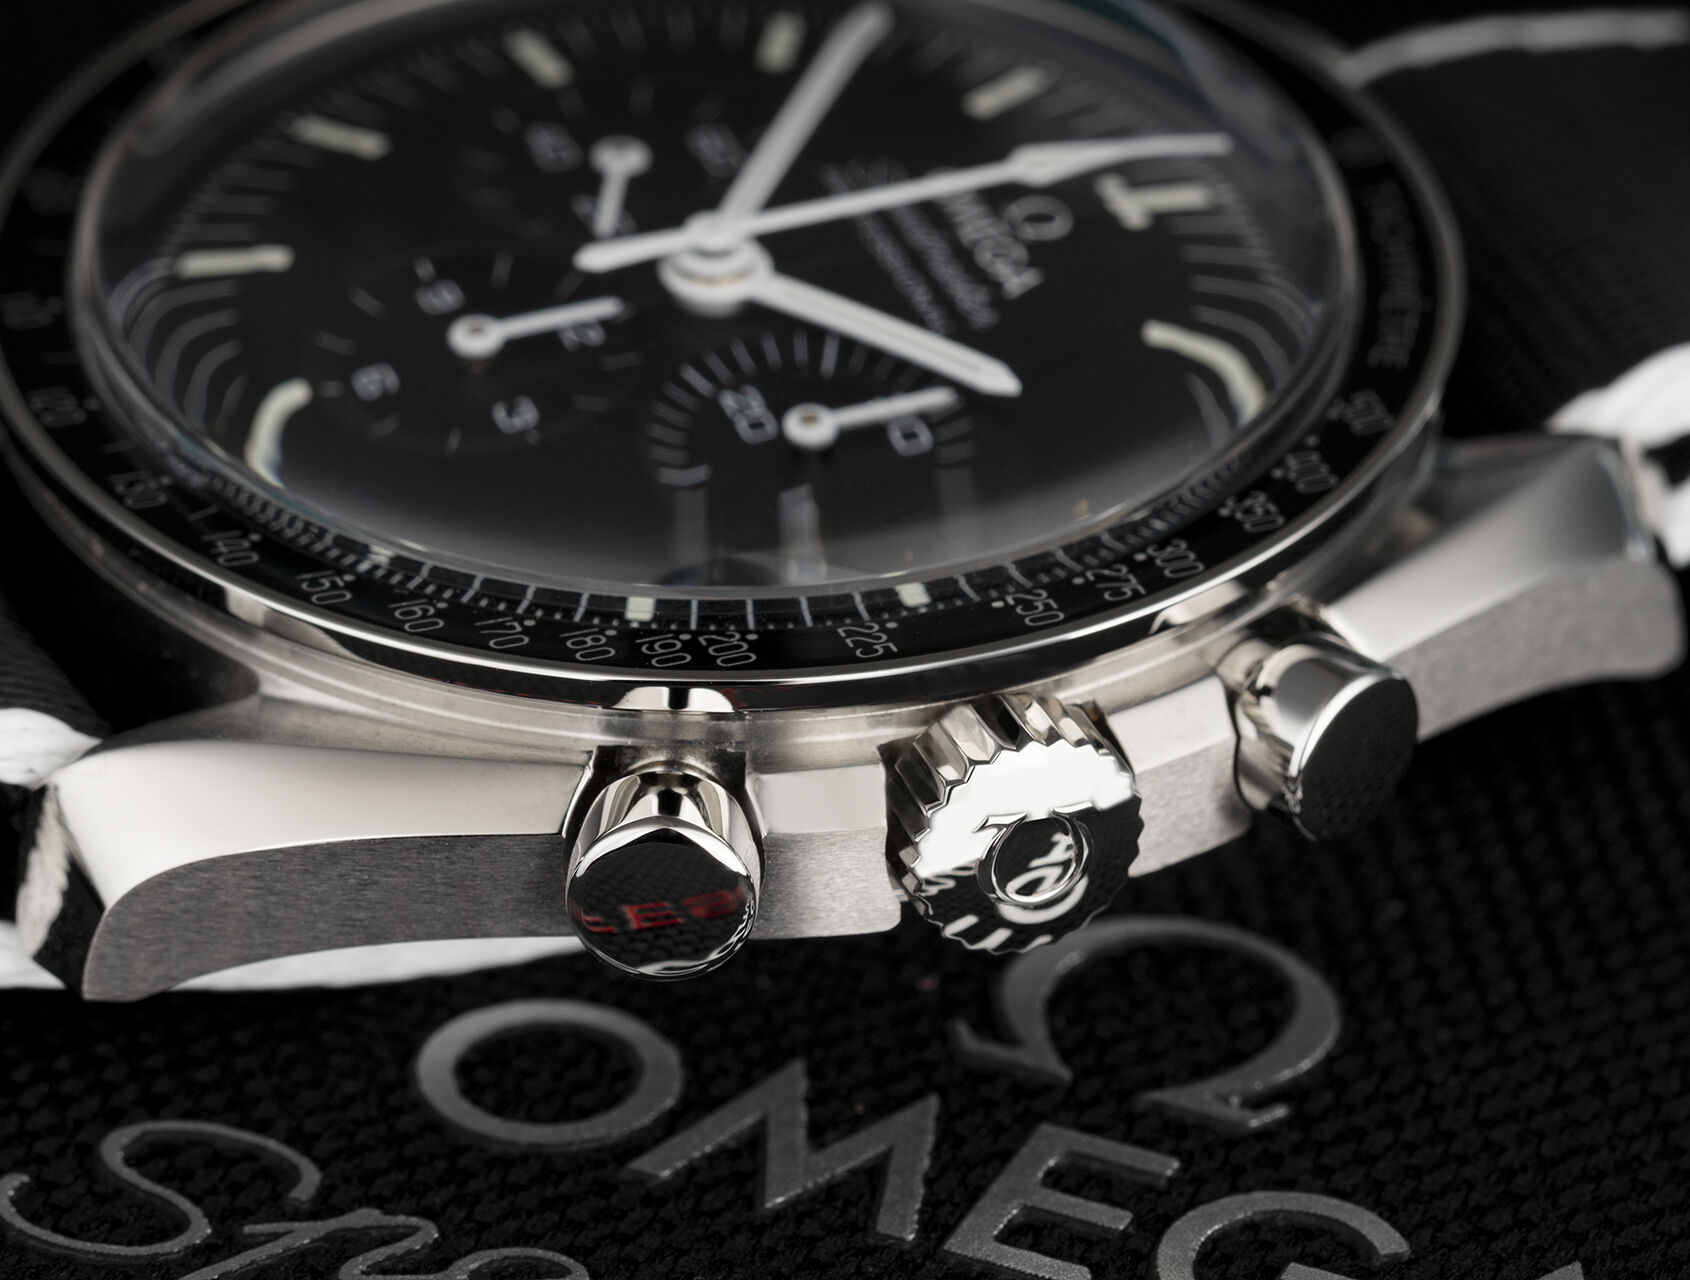 ref 310.32.42.50.01.001 | Co‑Axial 'Master Chronometer' | Omega Speedmaster Professional